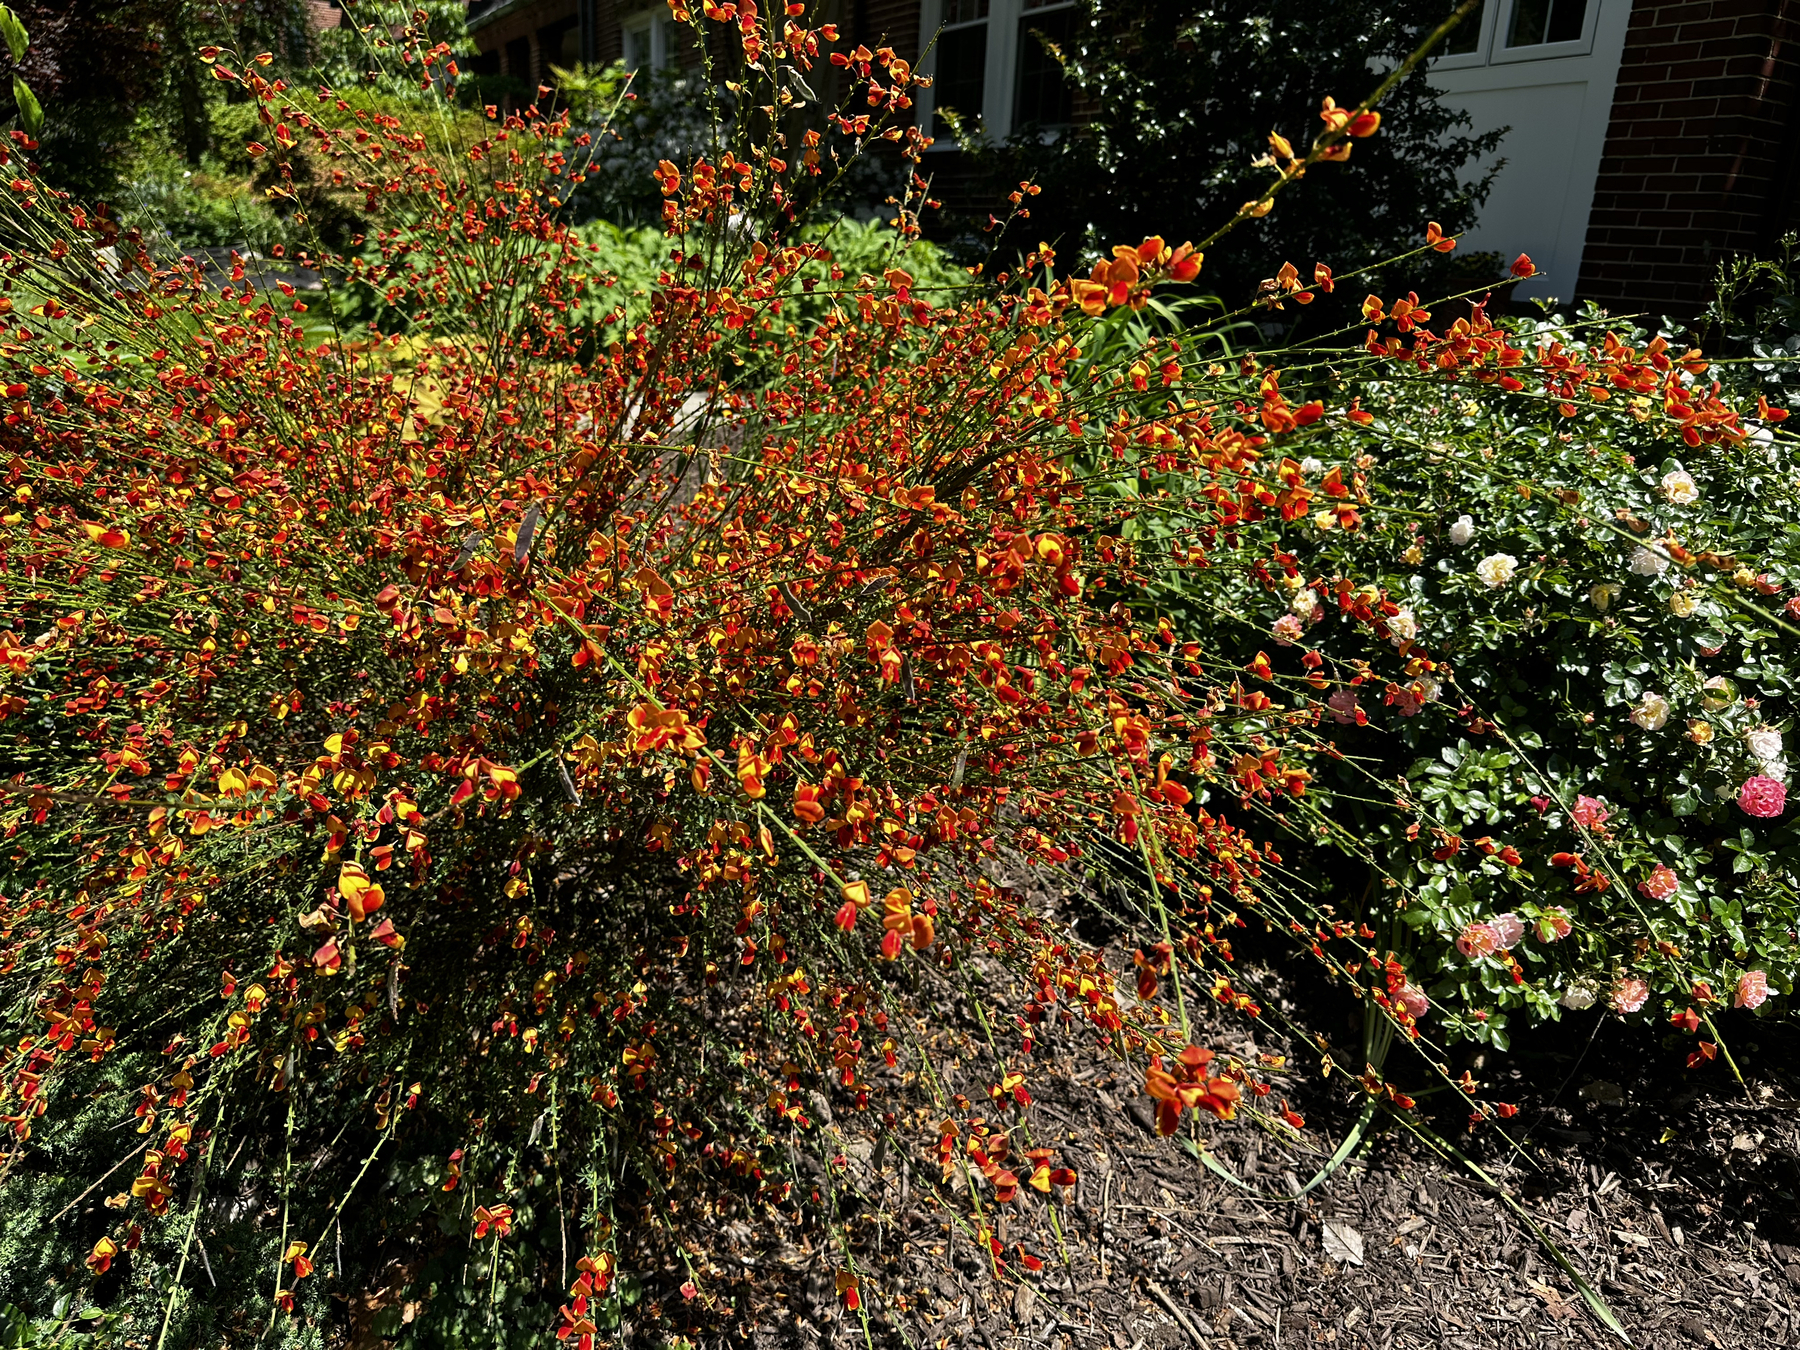 Vibrant red, orange, and yellow flowers on a bush outside.